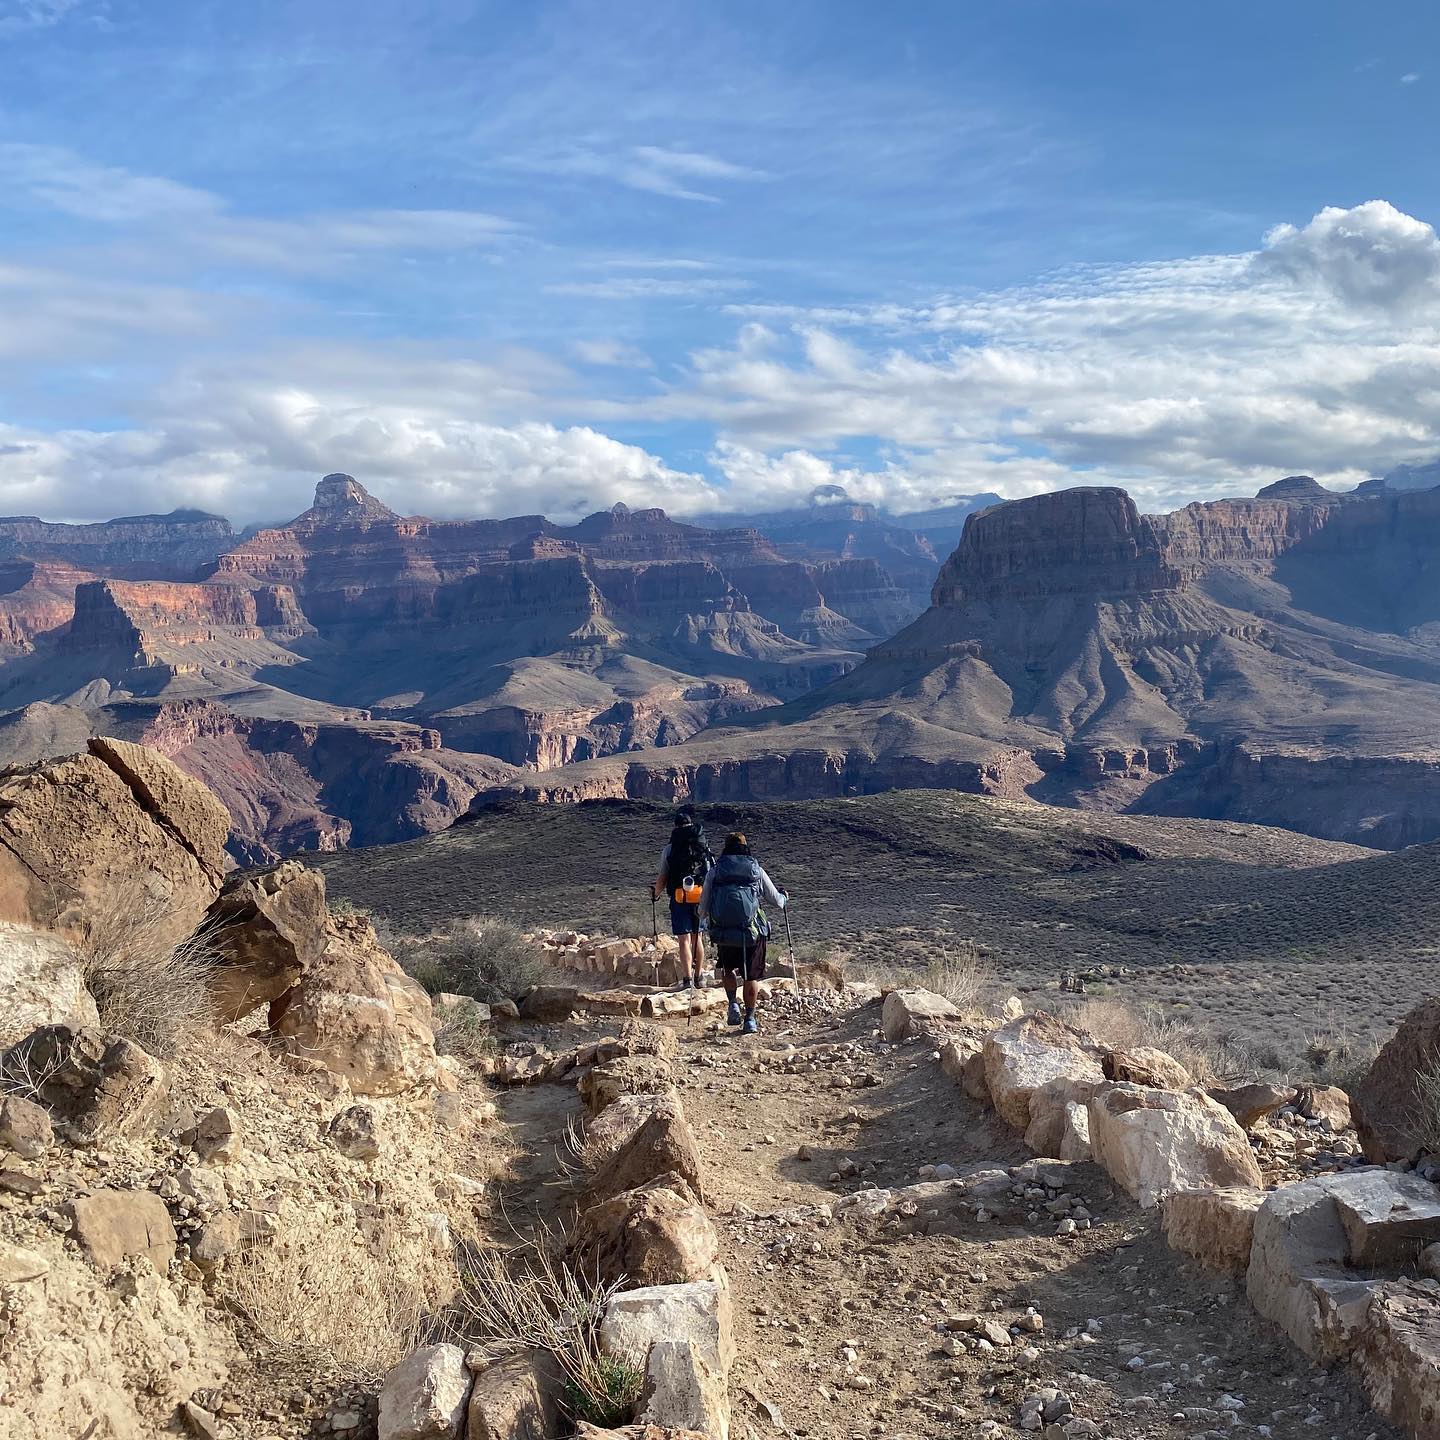 5 Takeaways from Our Hike Across the Grand Canyon